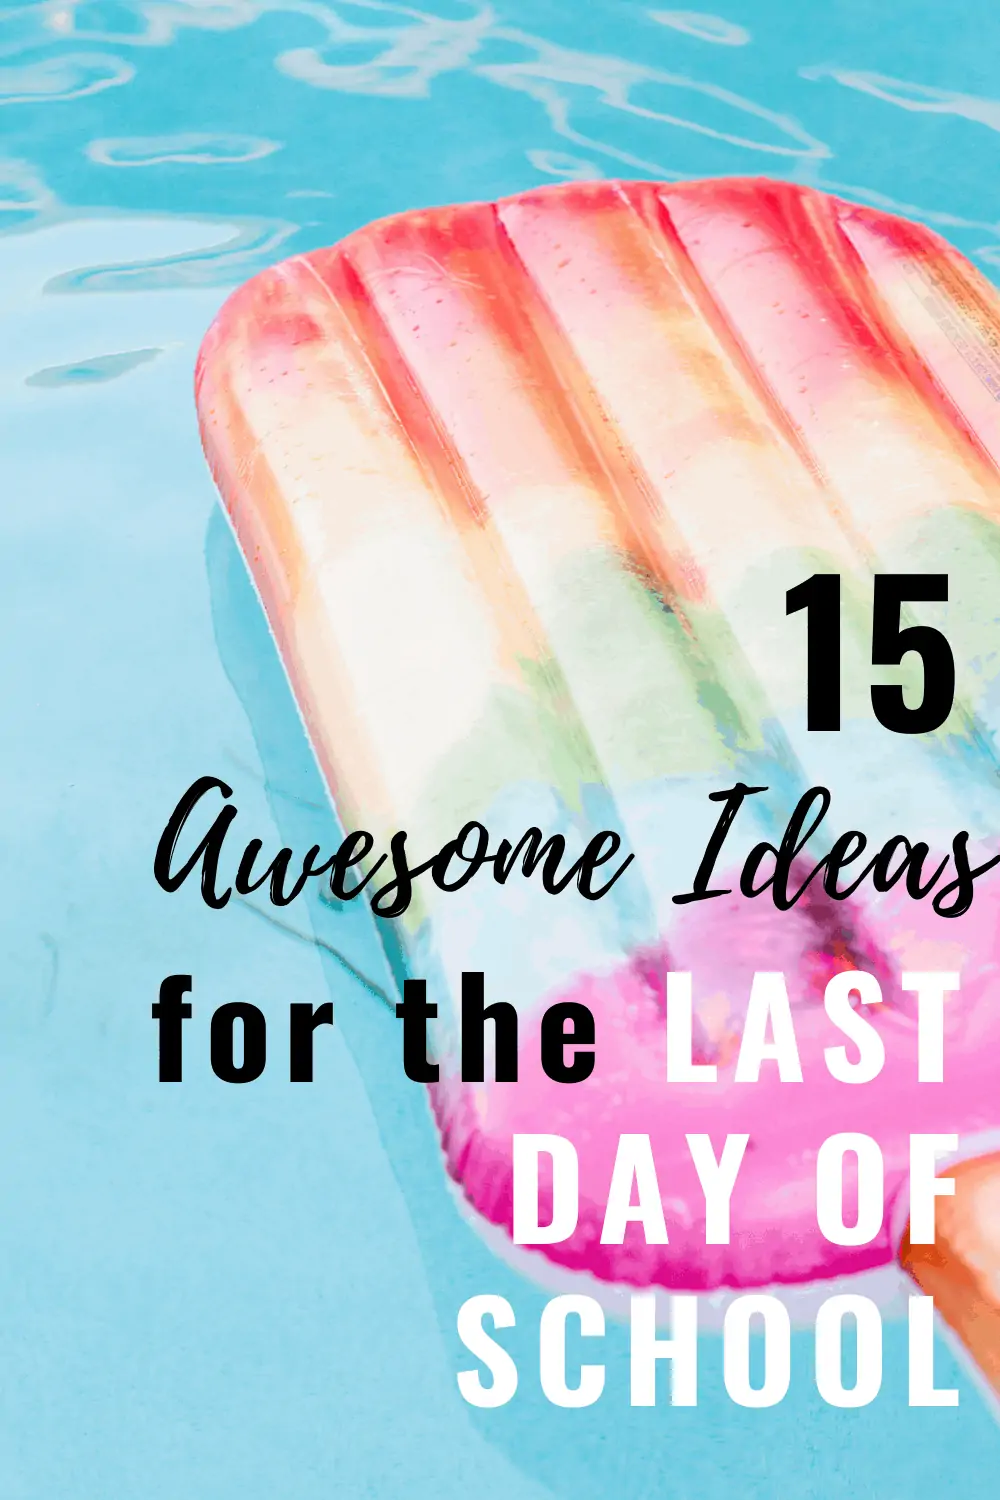 15 Fun Ideas for the Last Day of School with Your Kids